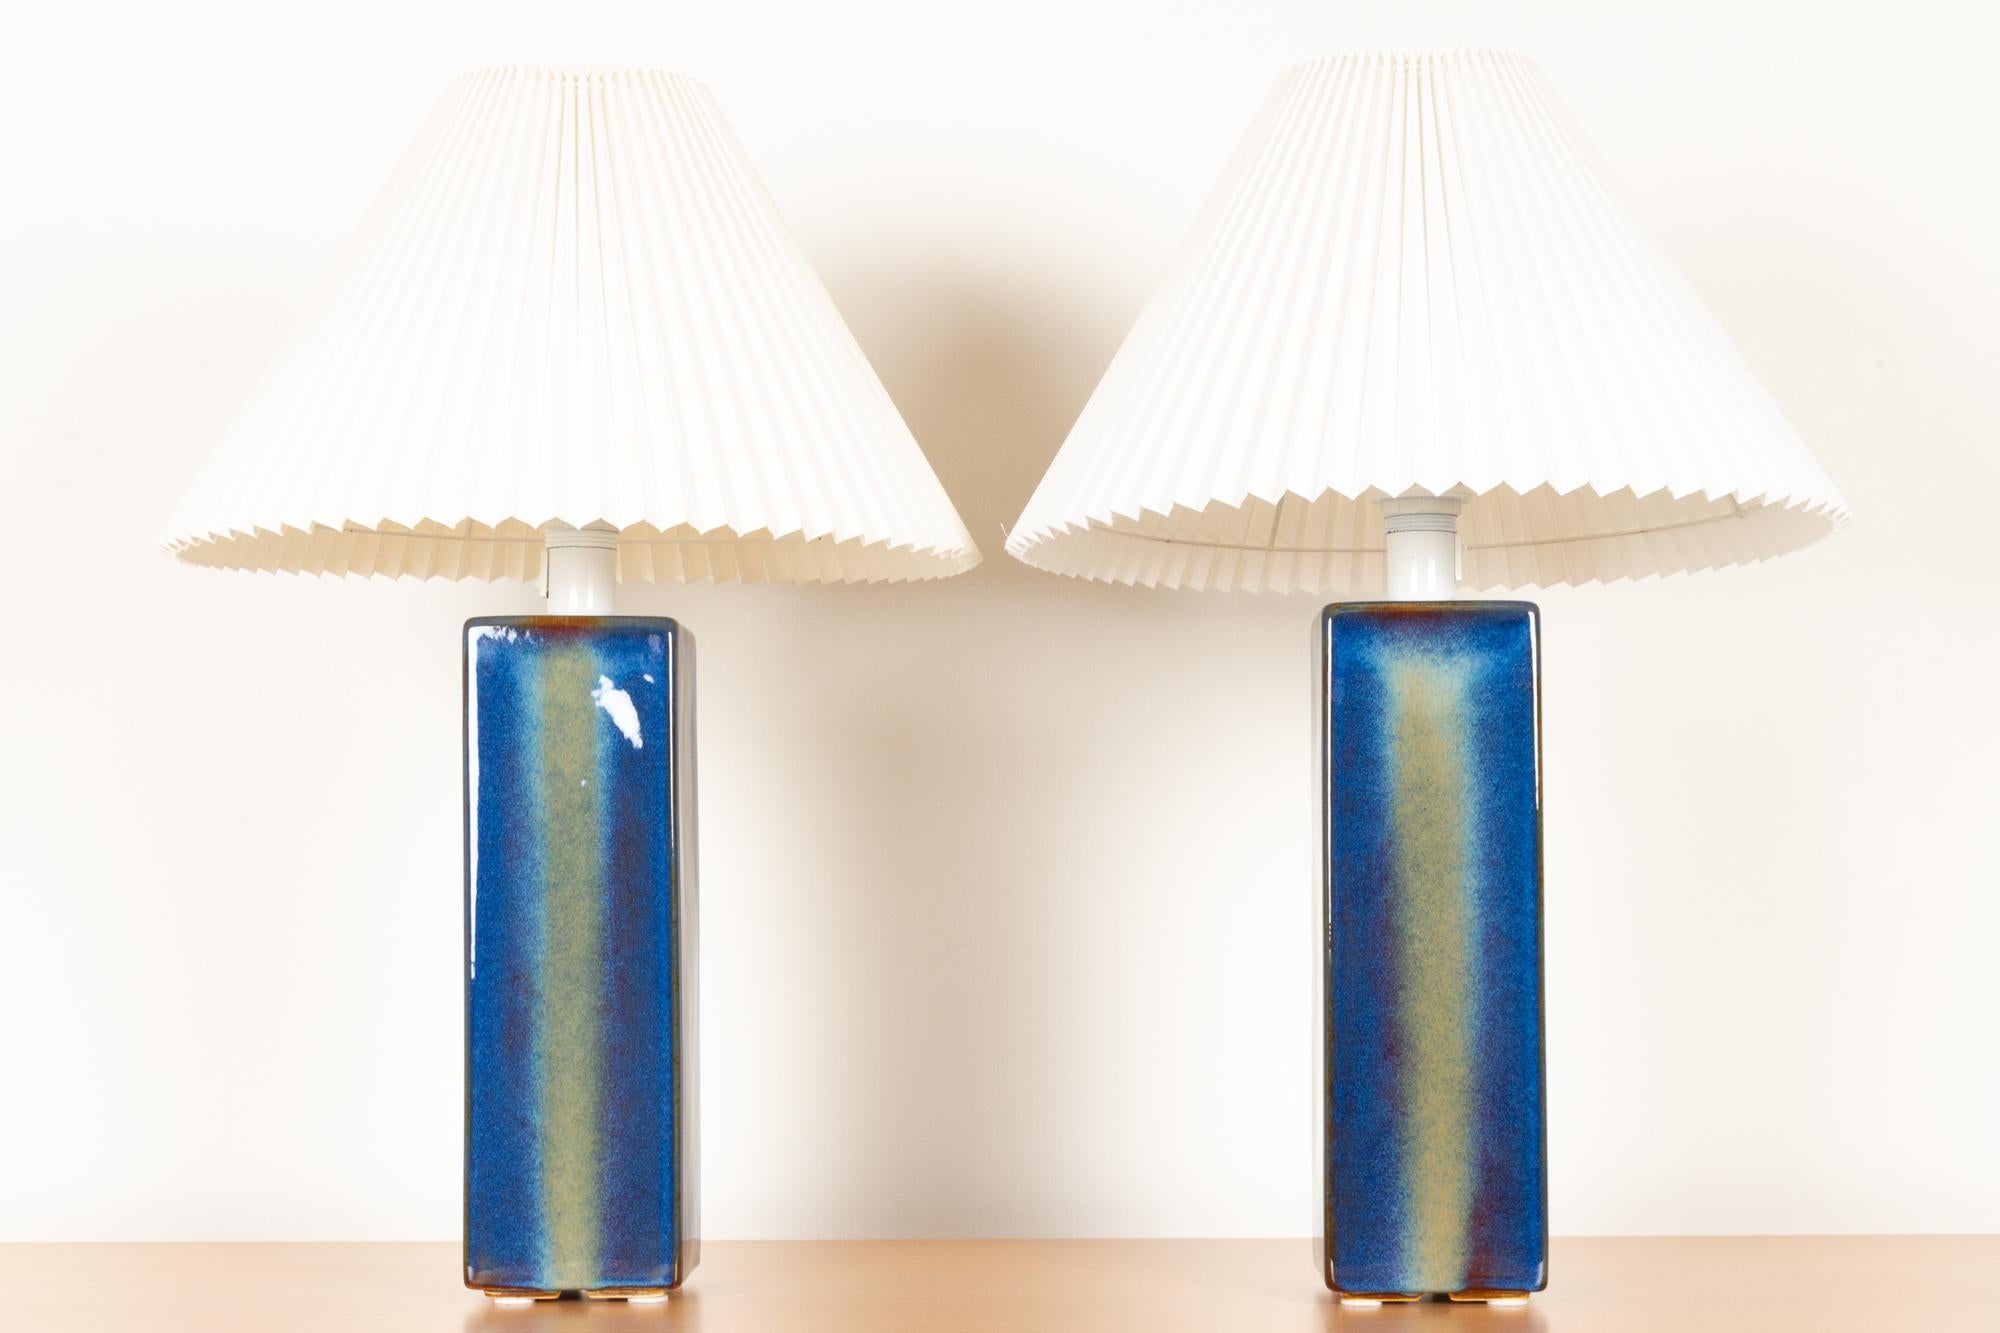 Vintage Danish ceramic table lamps by Søholm 1960s set of 2
Pair of tall Danish Mid-Century Modern table lamps in stunning blue and green glaze with pleated white shades. Handmade on the small Danish island of Bornholm. 
Size of the lamp body